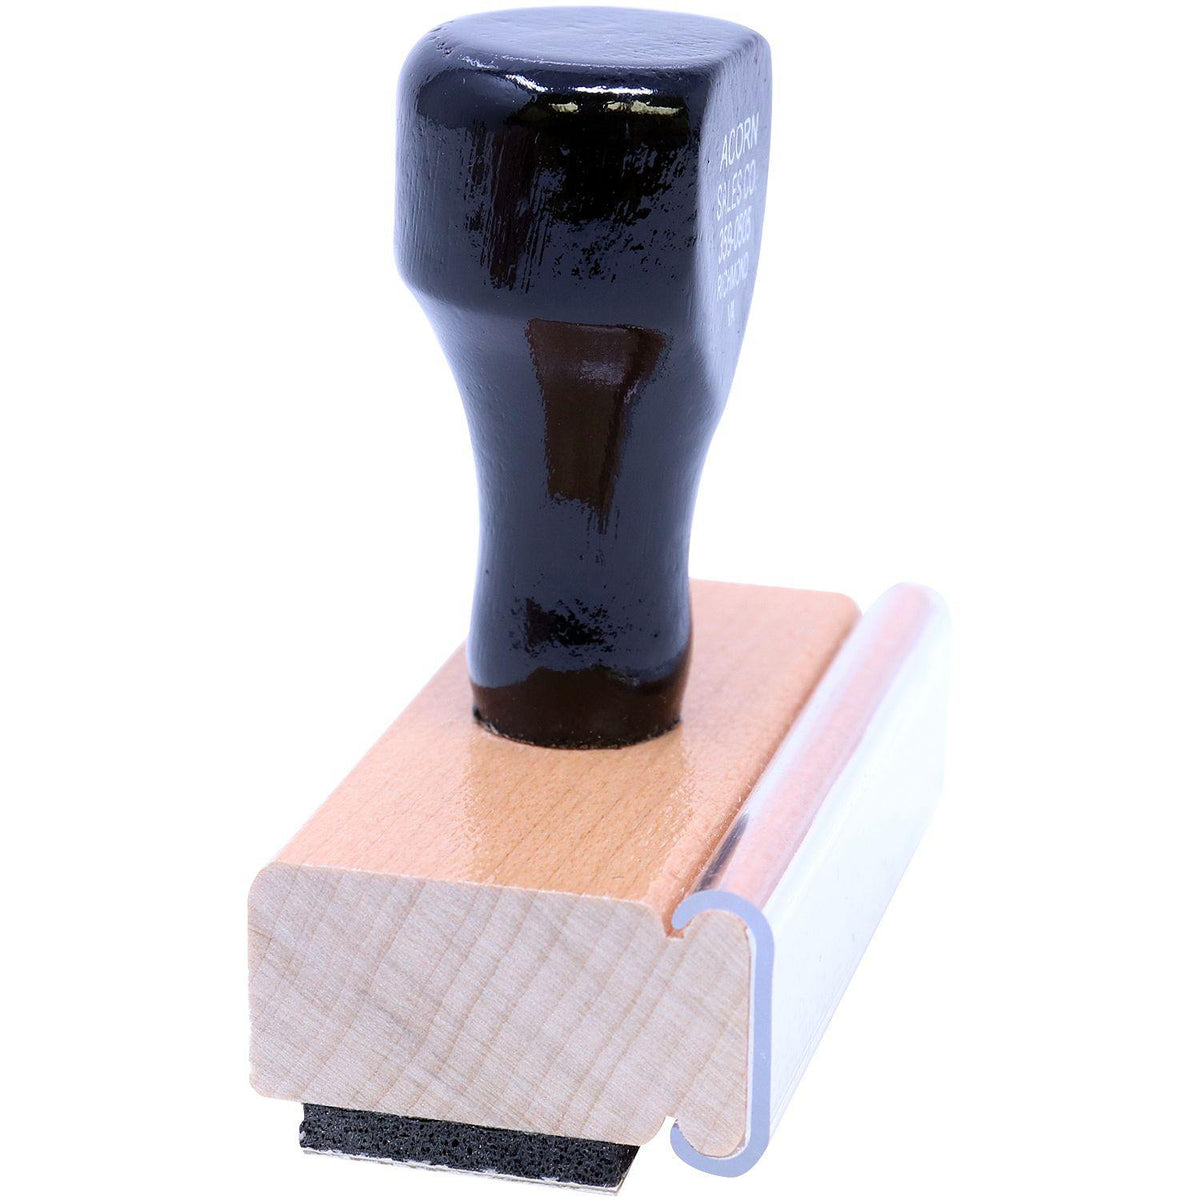 Side View of Large Narrow Font First Class Mail Rubber Stamp at an Angle